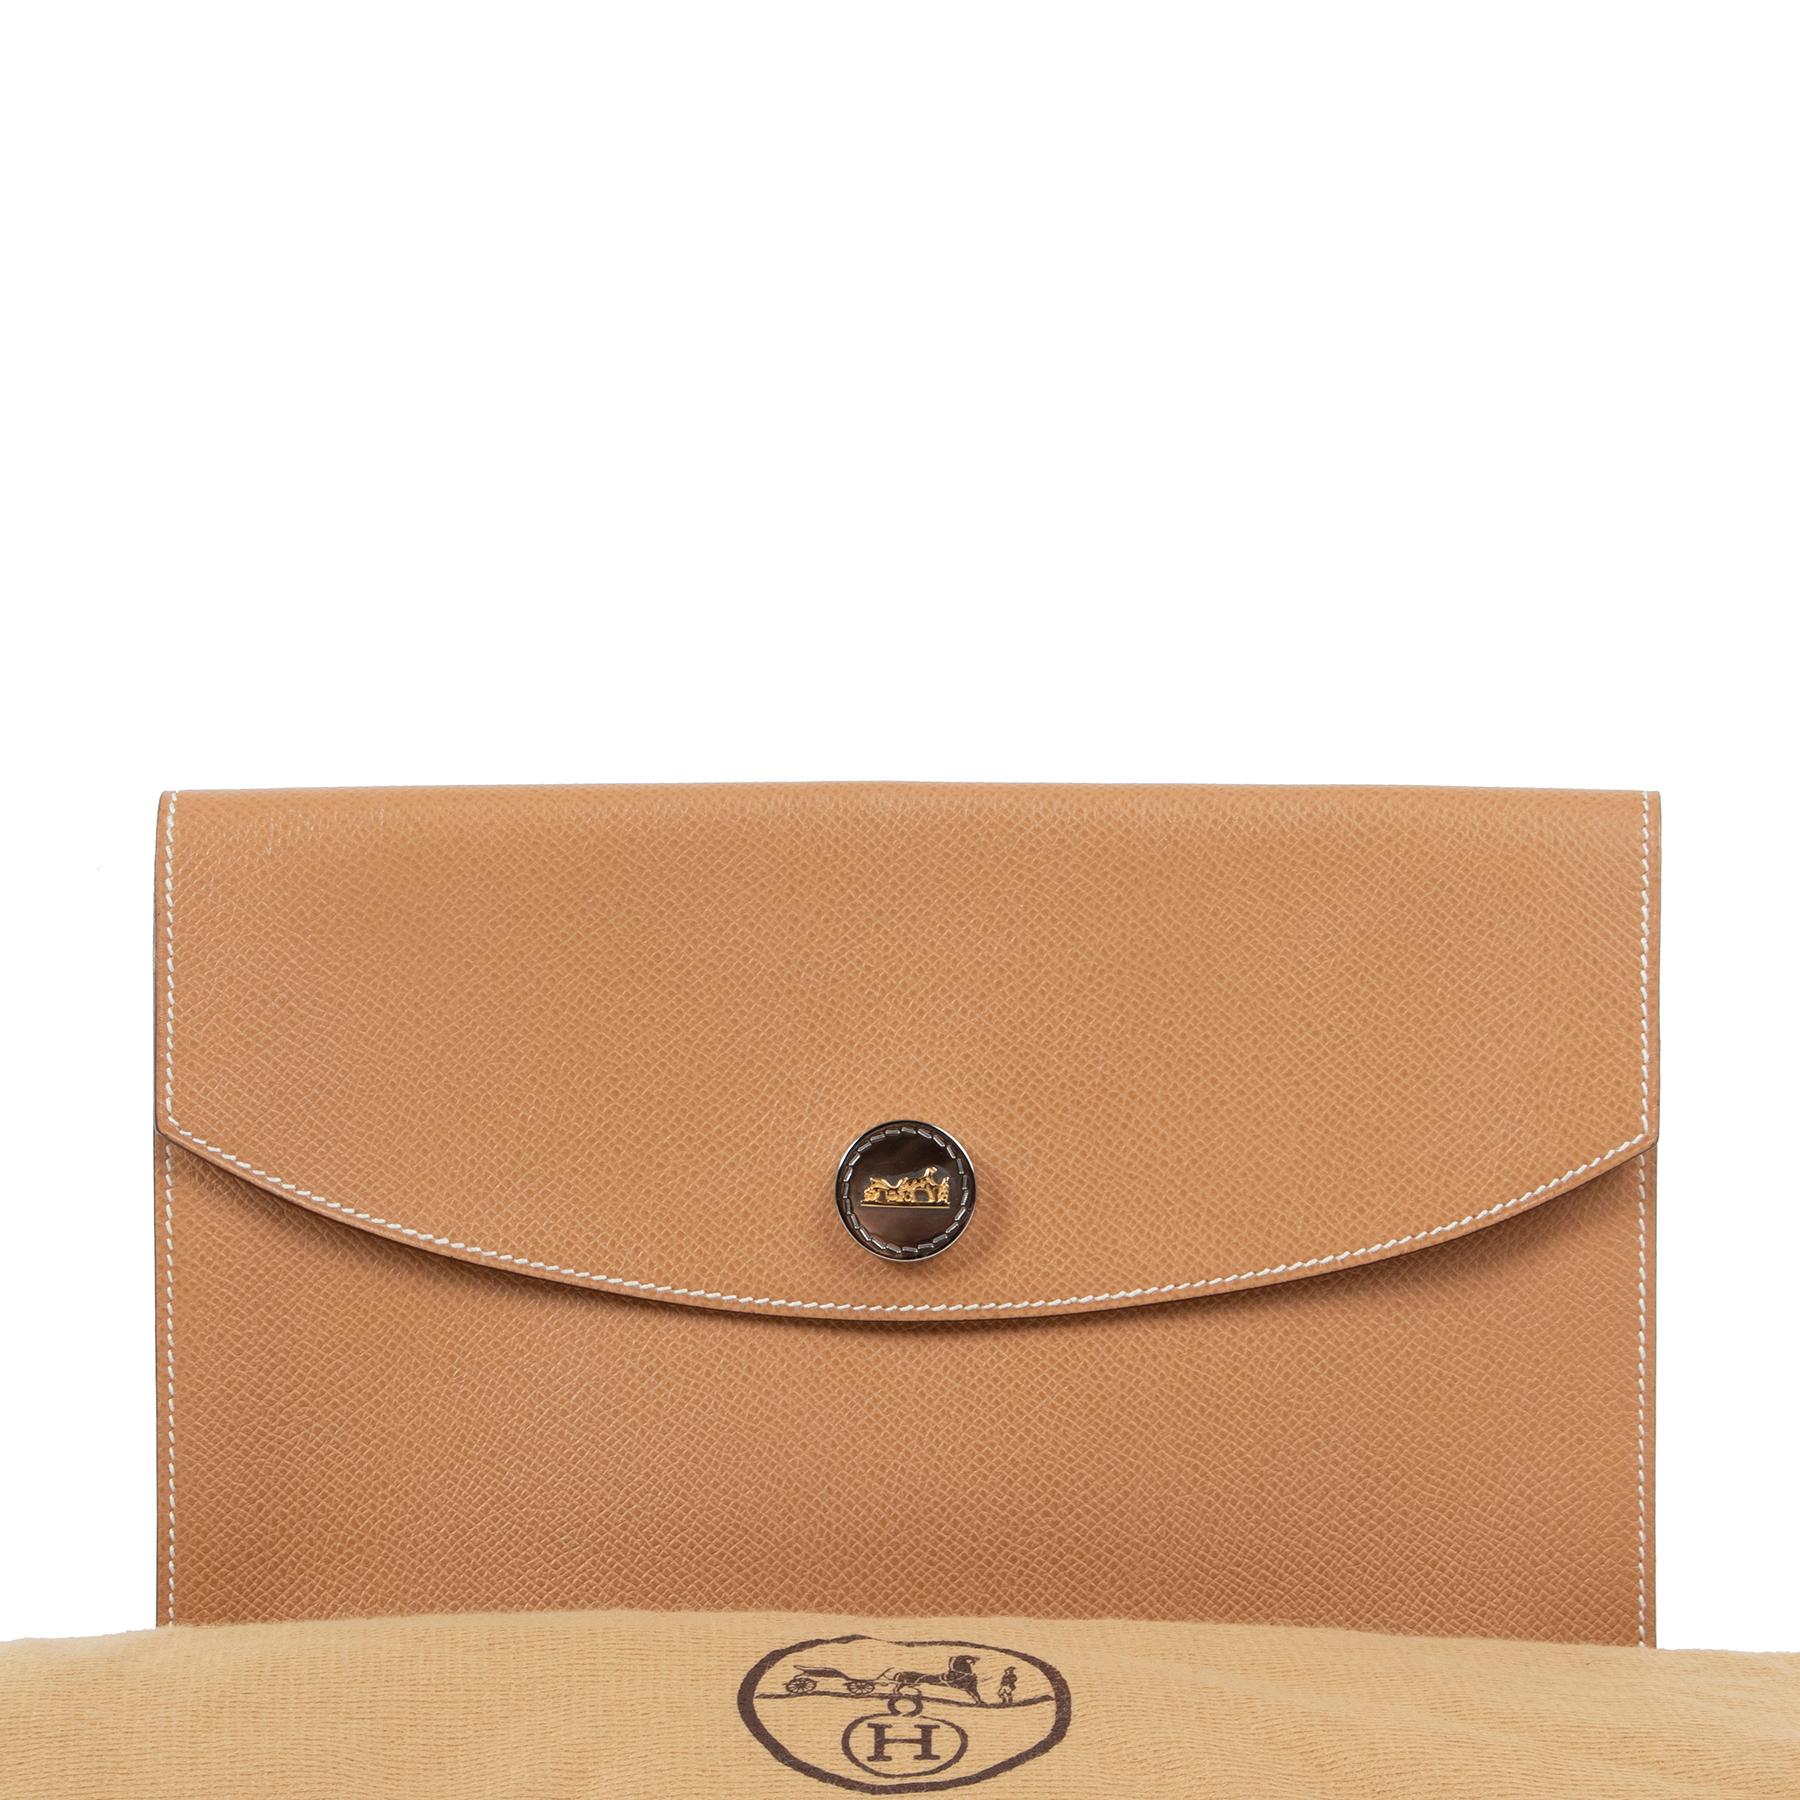 Hermès Vintage Rio Courcheval Clutch

Your new partner in crime for every evening soirée or rendez-vous.

This Hermès clutch is crafted in brown leather and finished with a silver and gold push button. The petite interior fits your